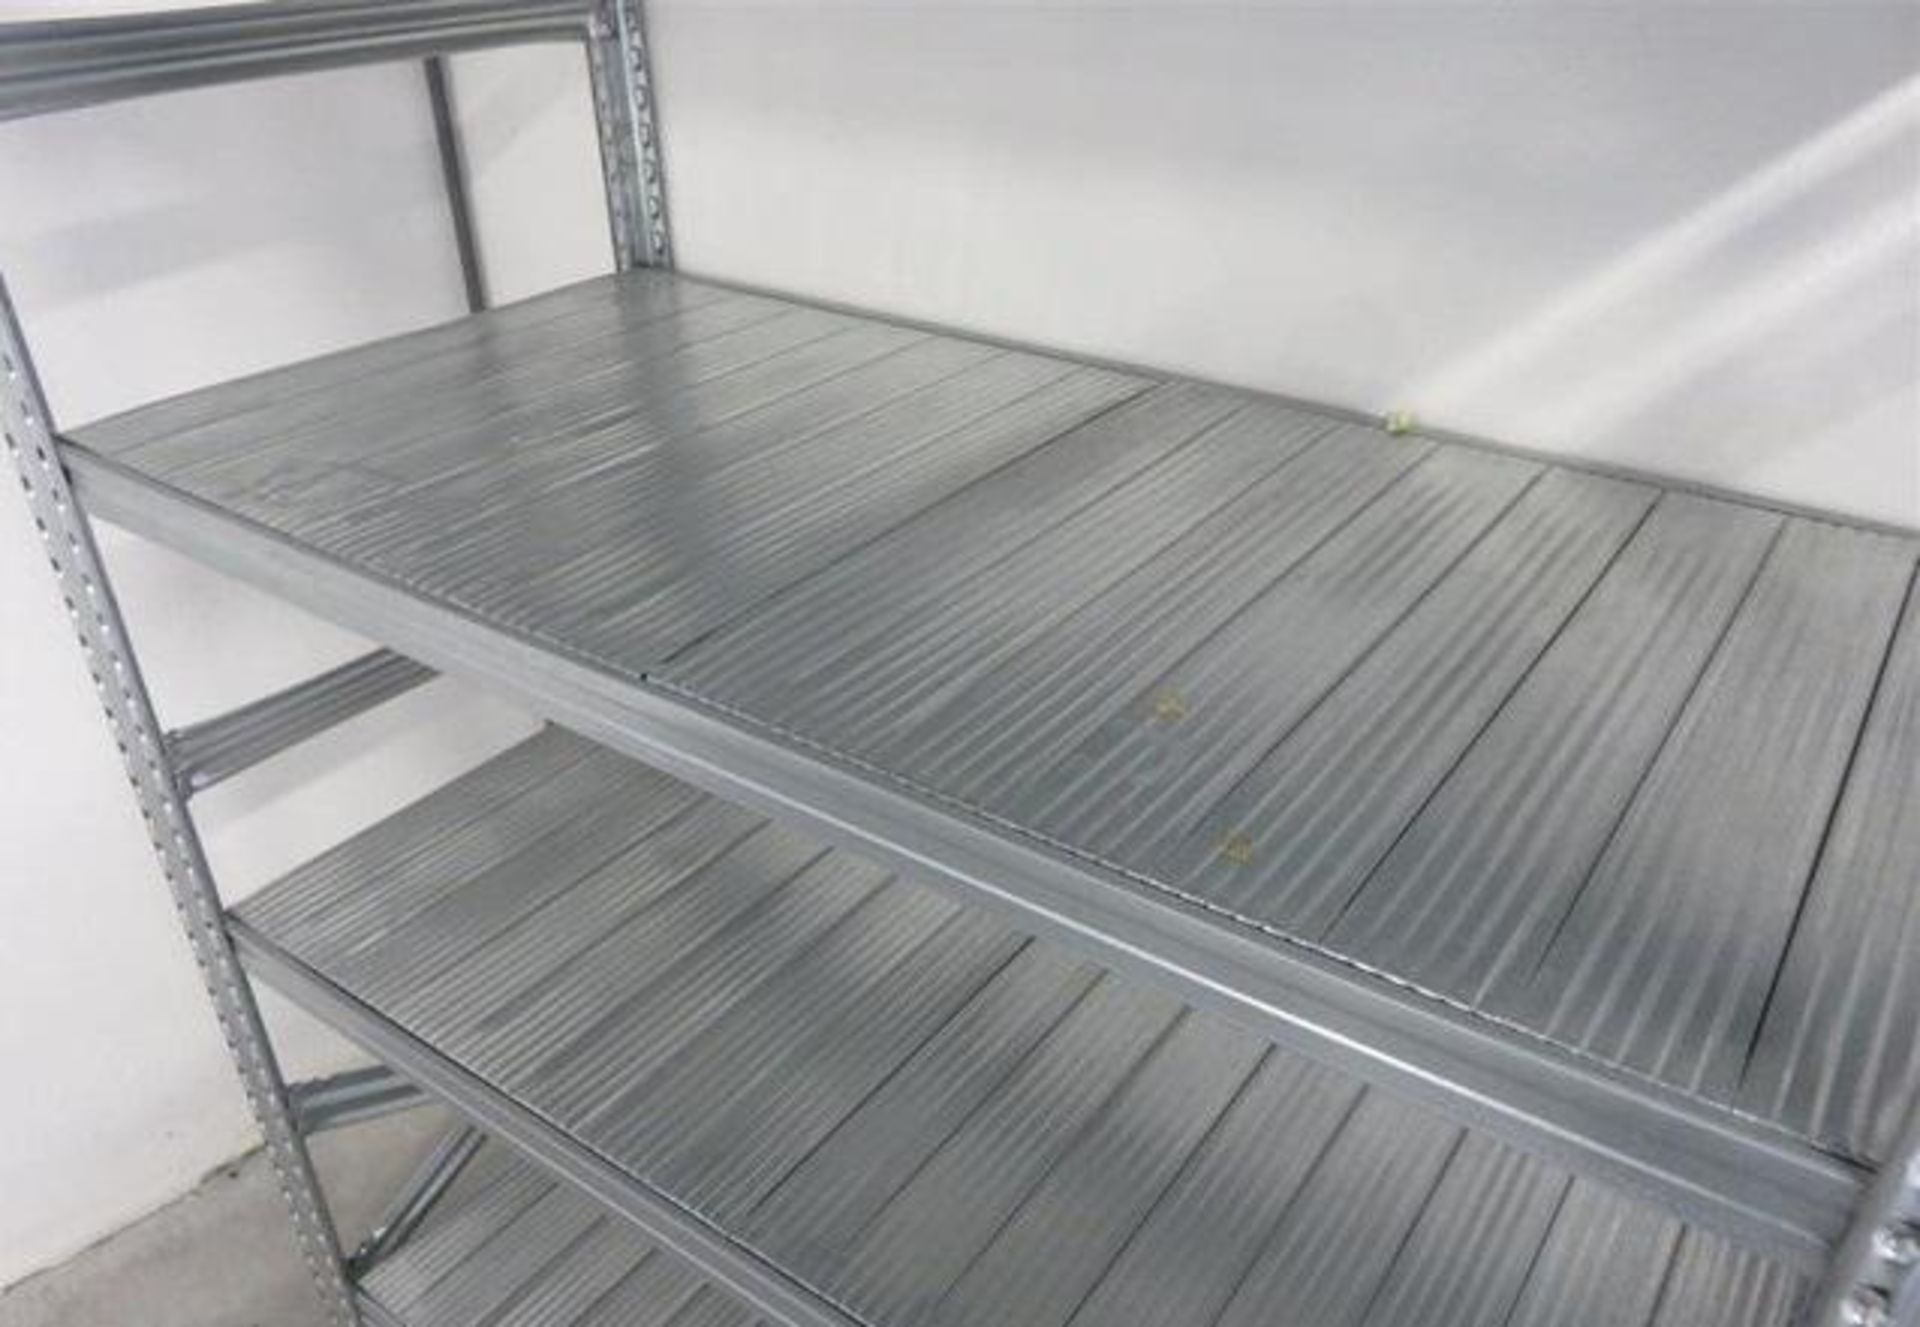 9 x Bays of Metalsistem Steel Modular Storage Shelving - Includes 58 Pieces - Recently Removed - Image 6 of 18